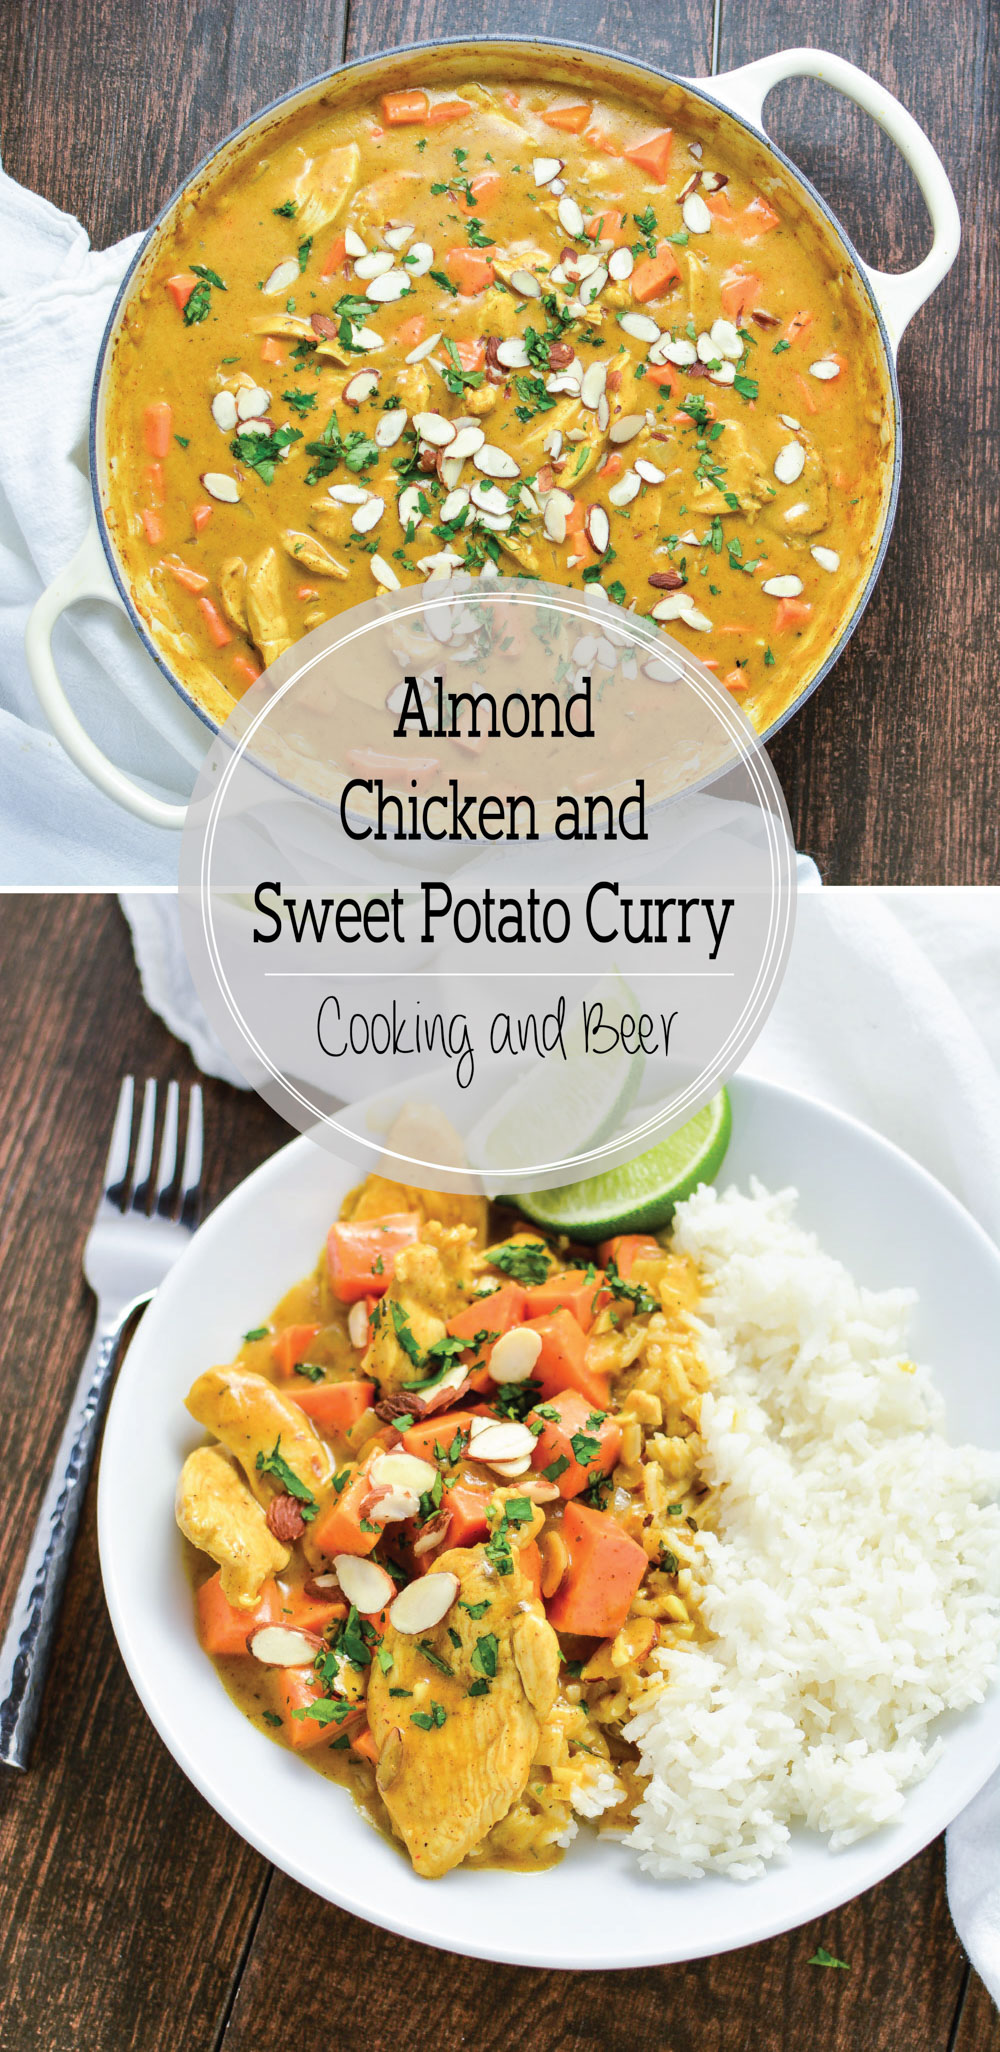 Almond Chicken and Sweet Potato Curry - a quick and simple dinner option that's ready in under an hour!